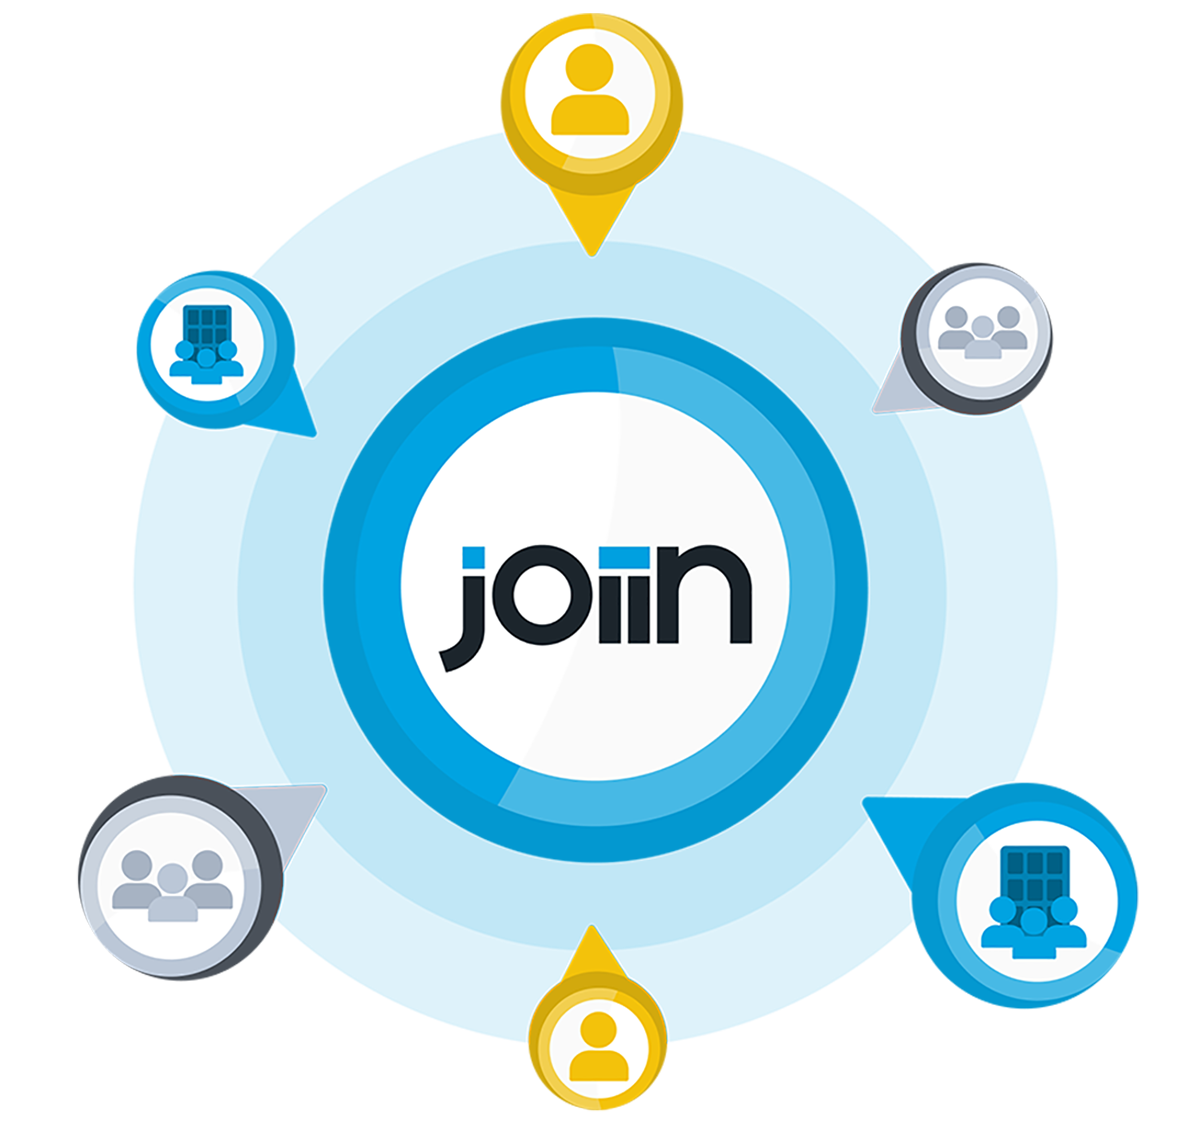 Collaborative working within Joiin